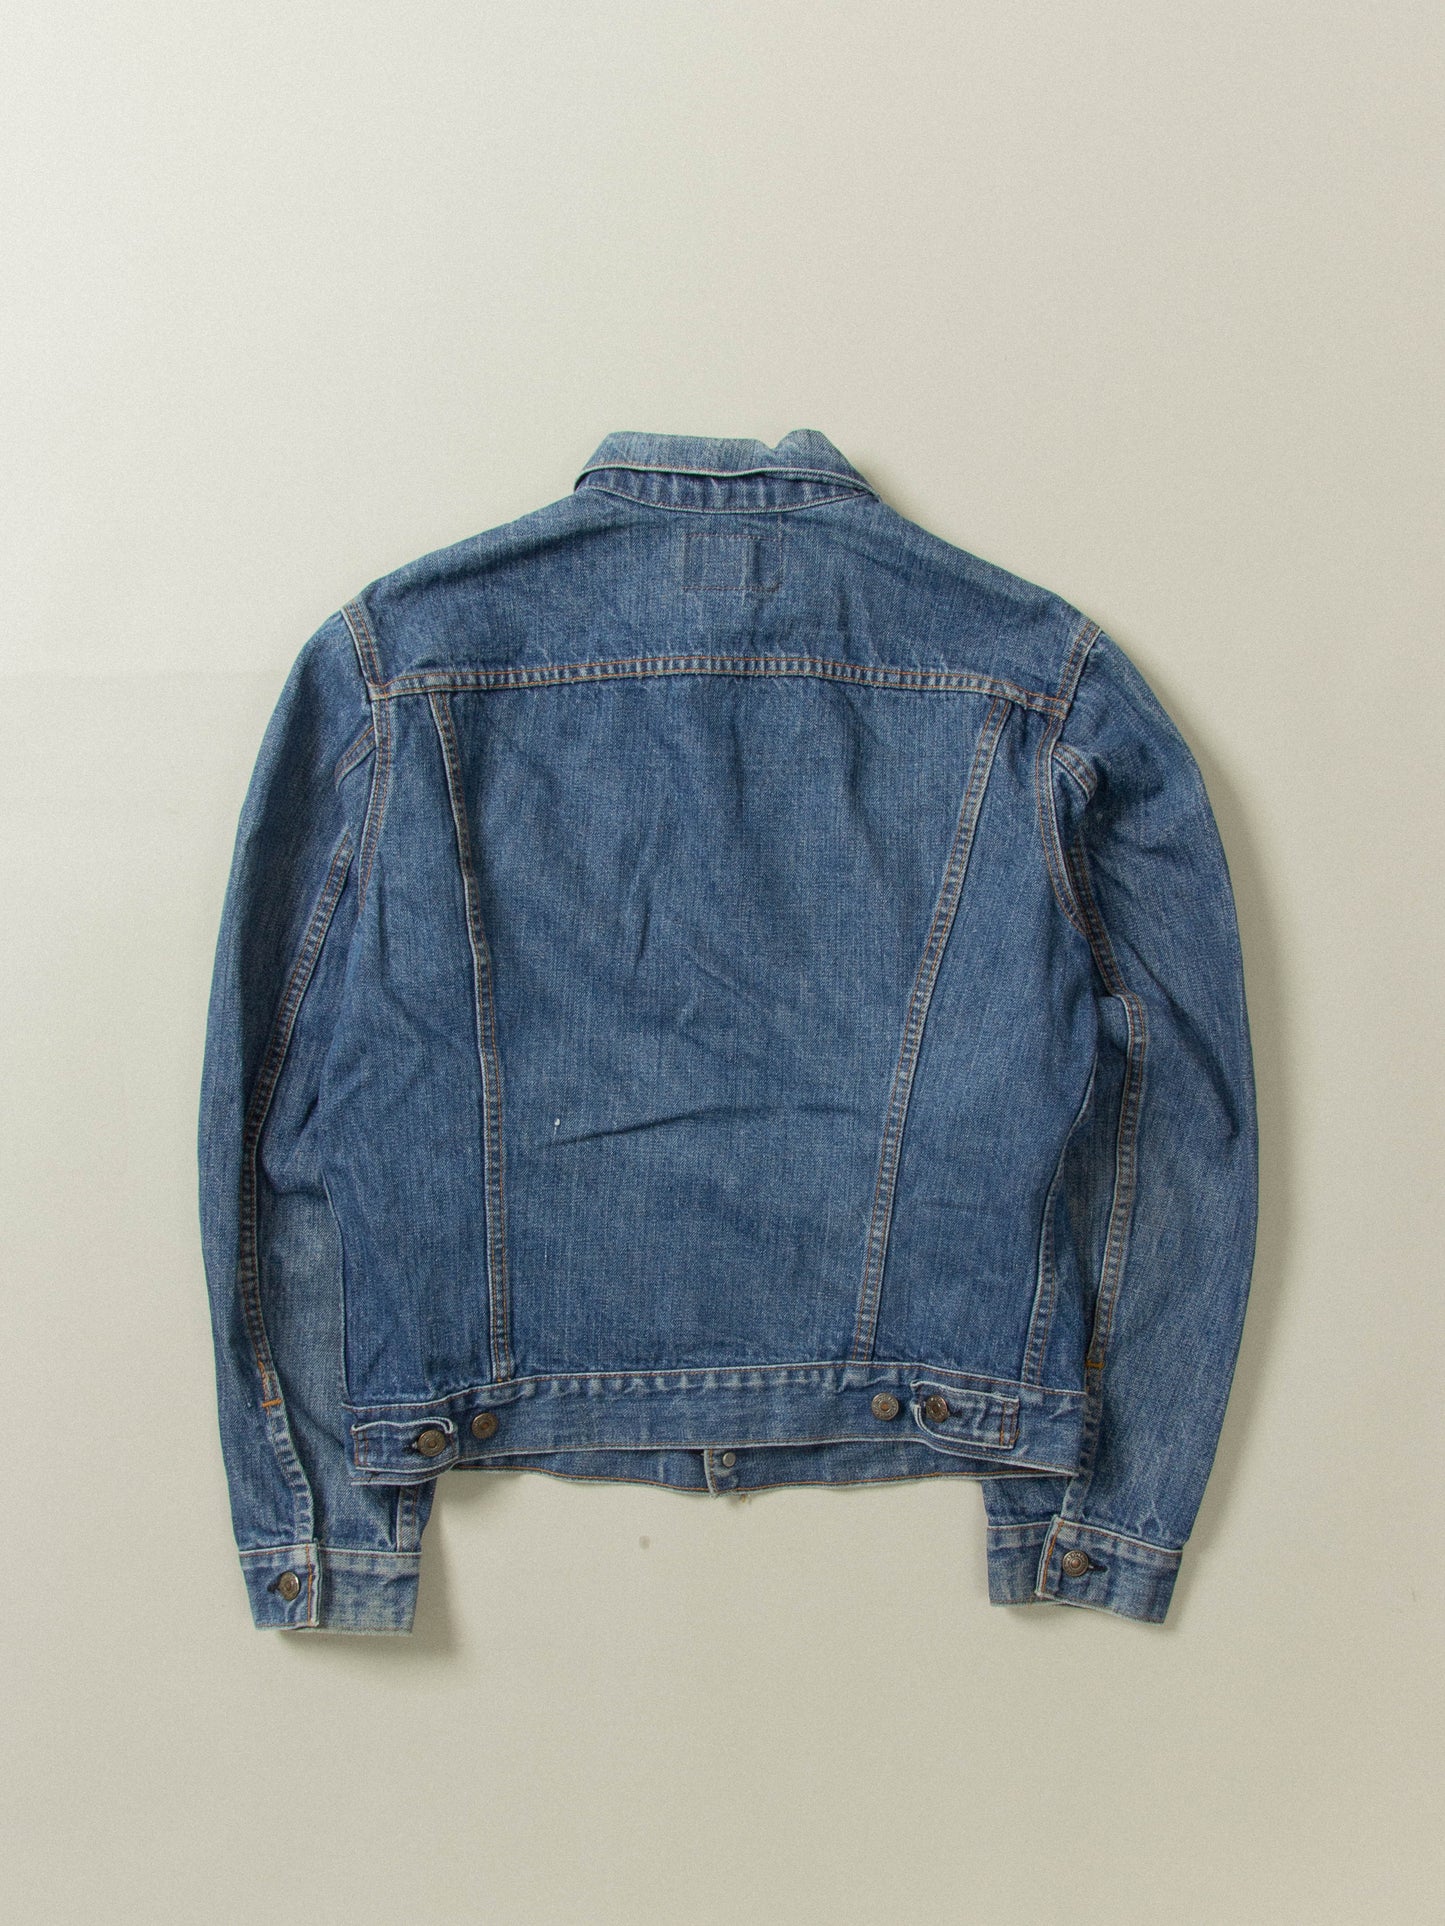 Vtg Levi's Type III Denim Jacket - Made in USA (S)